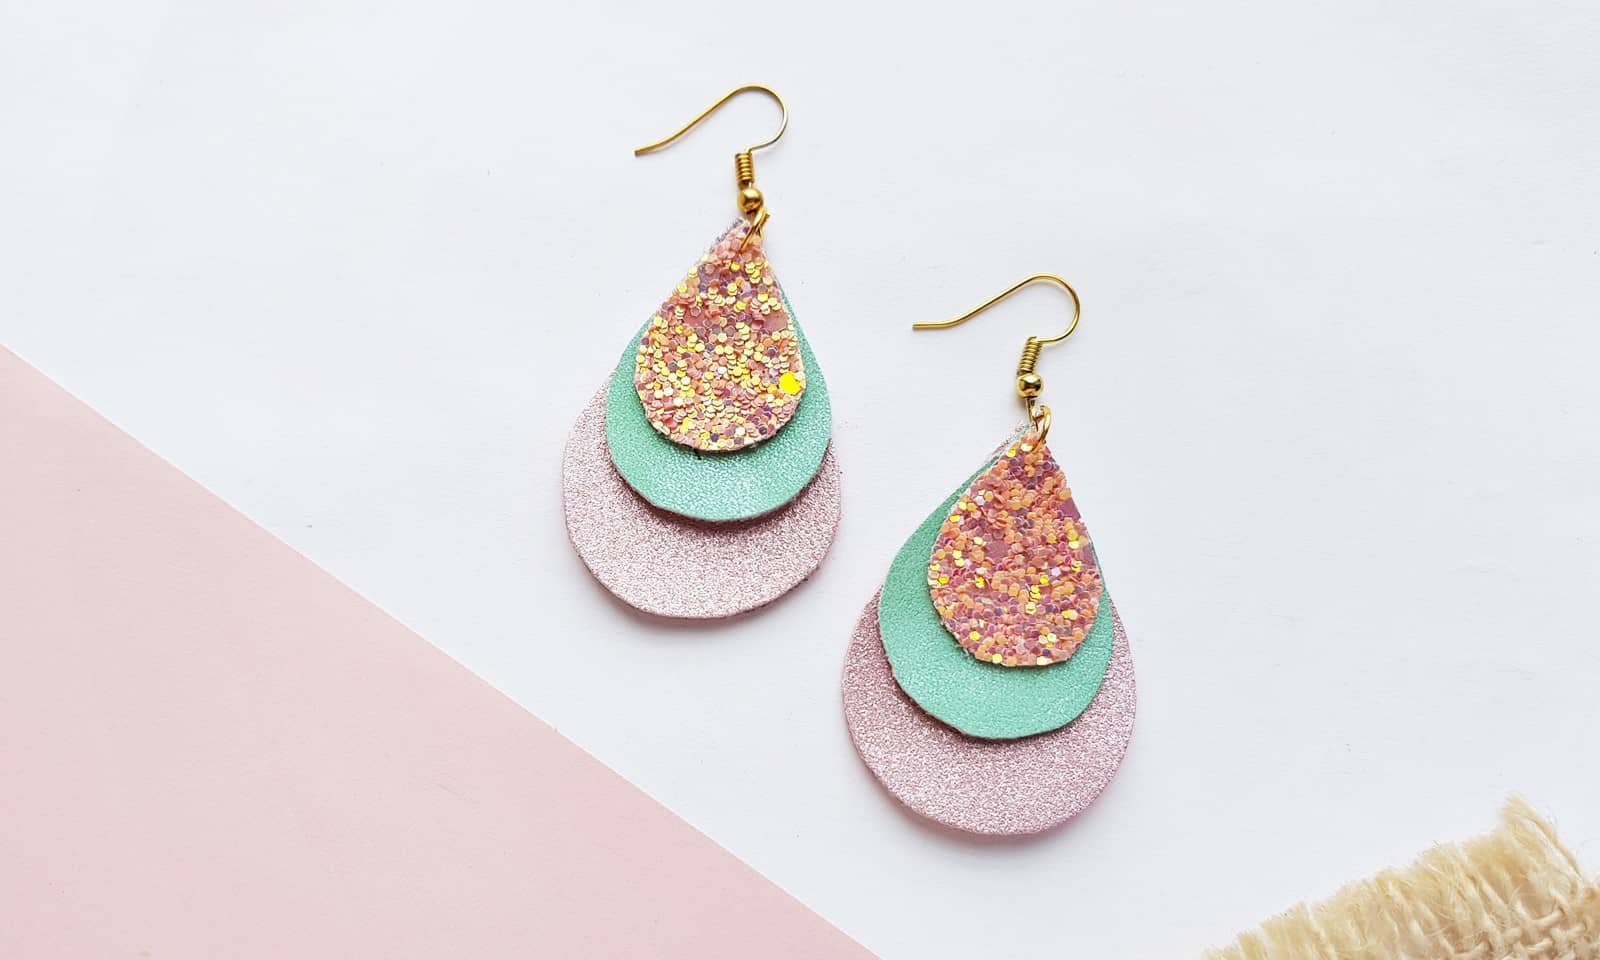 leather earrings with designer look 4 styles